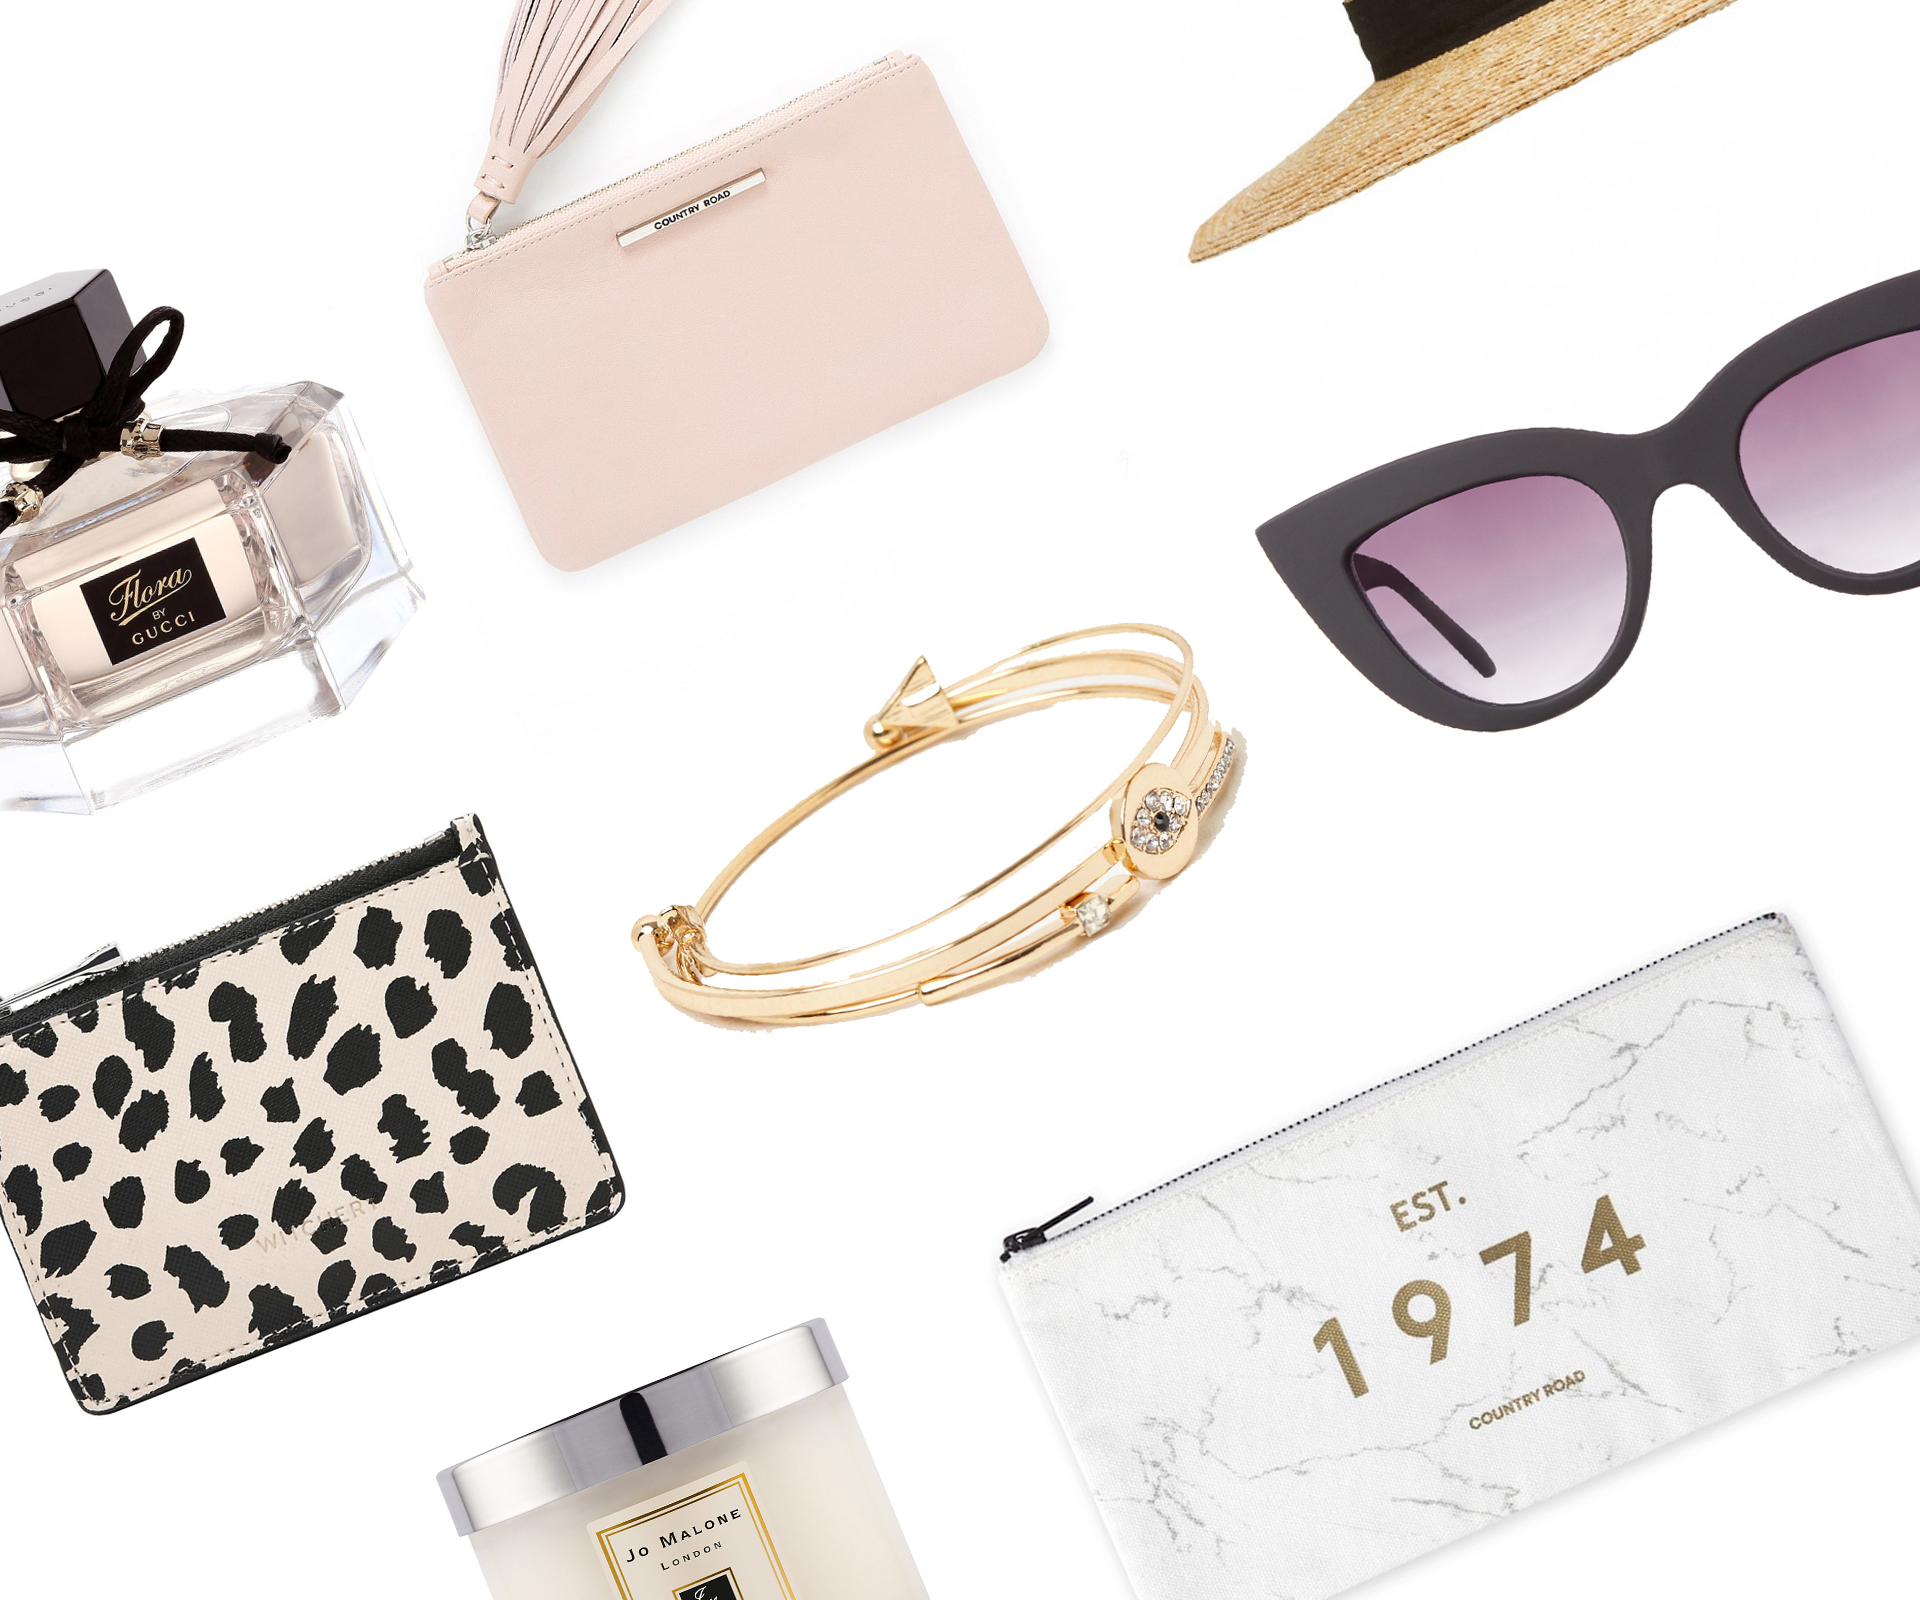 28 fashionable Christmas gifts under $100